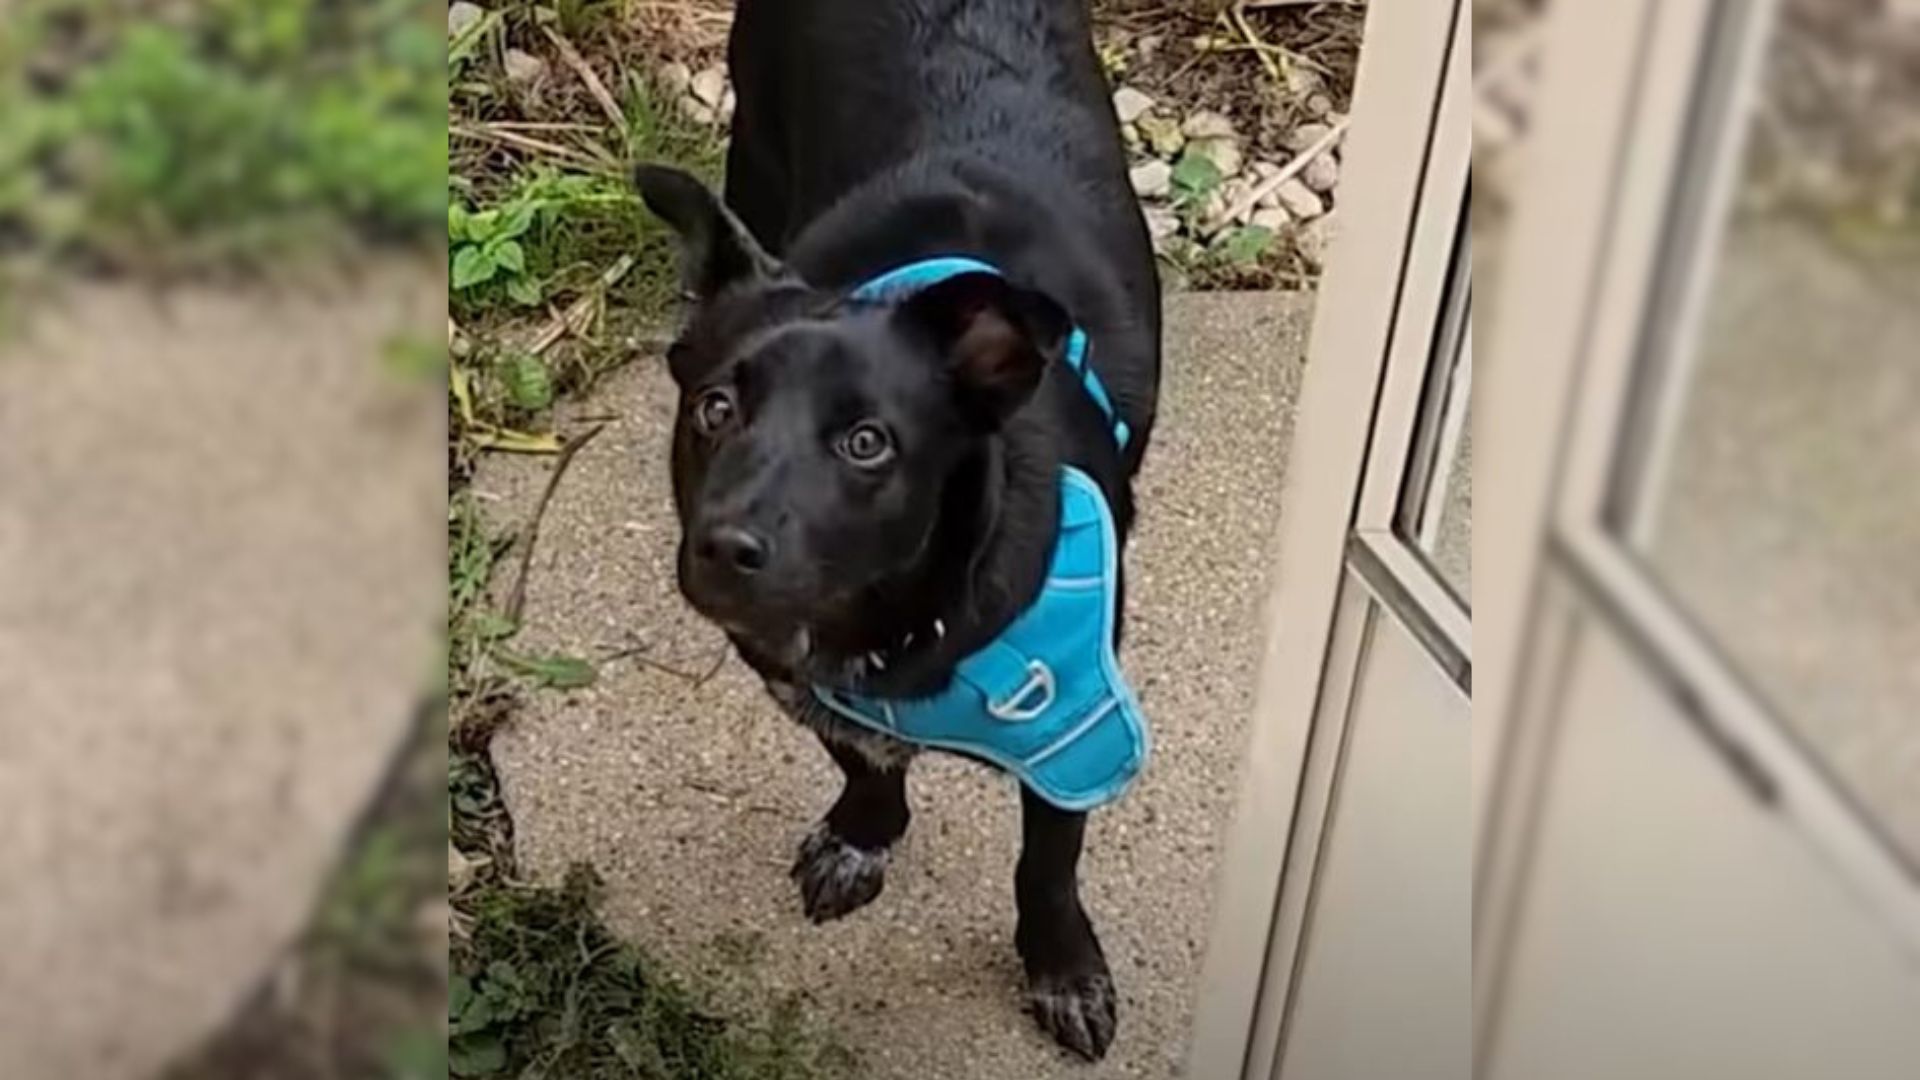 Man Couldn’t Bear The Trauma Of Losing His Dog But Then He Met The Most Perfect Pup